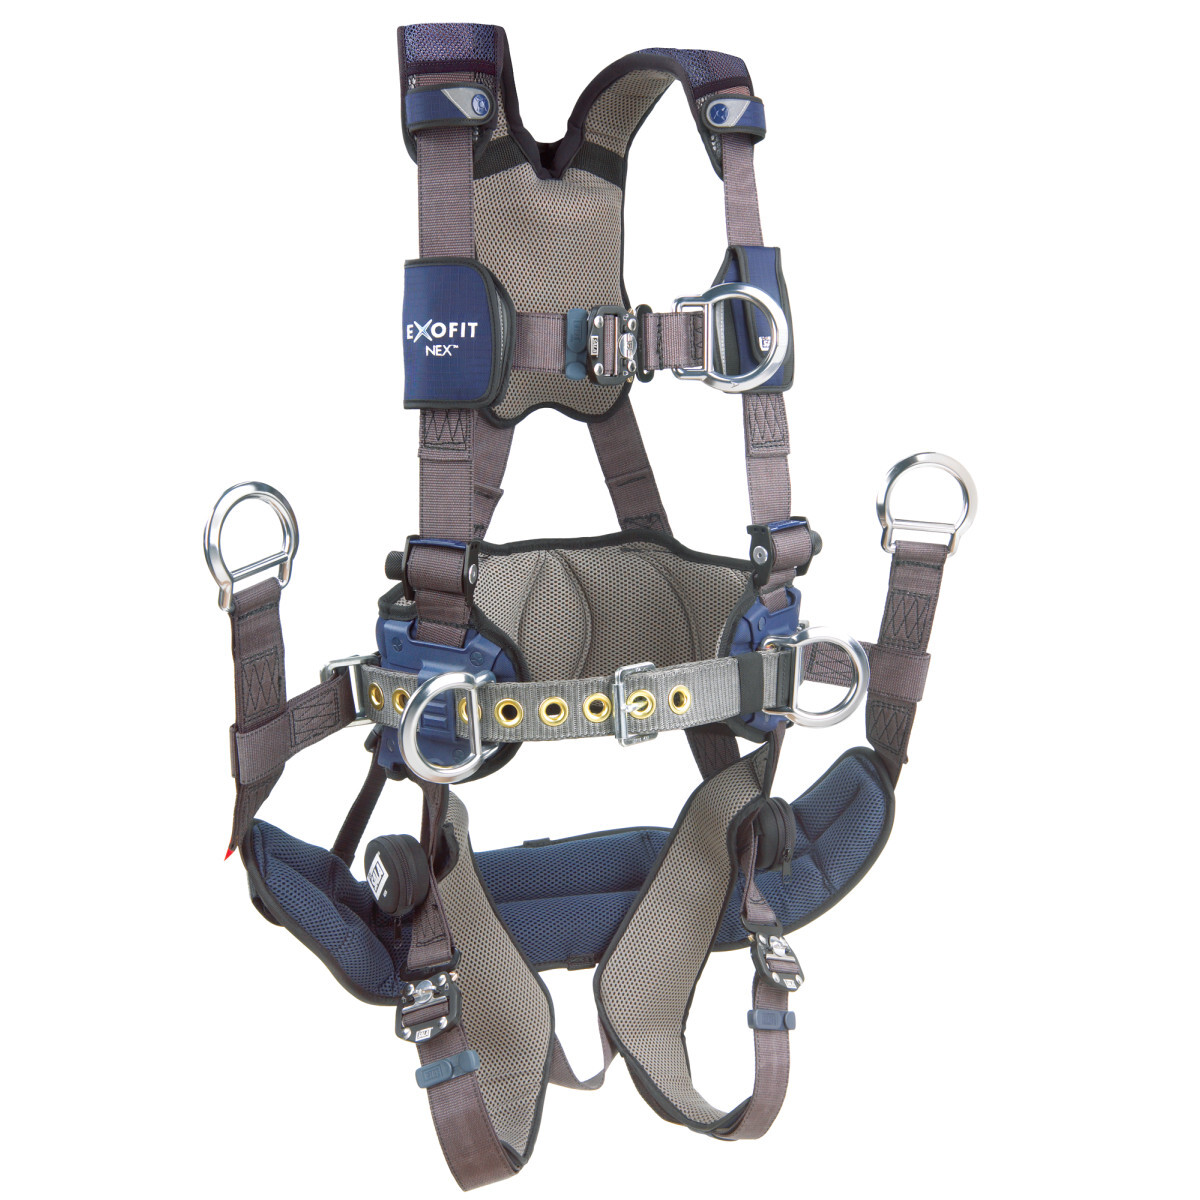 3M™ DBI-SALA® Small ExoFit NEX™ Full Body/Vest Style Harness With Tech-Lite™ Aluminum Back And Front D-Ring, Duo-Lok™ Quick Conn